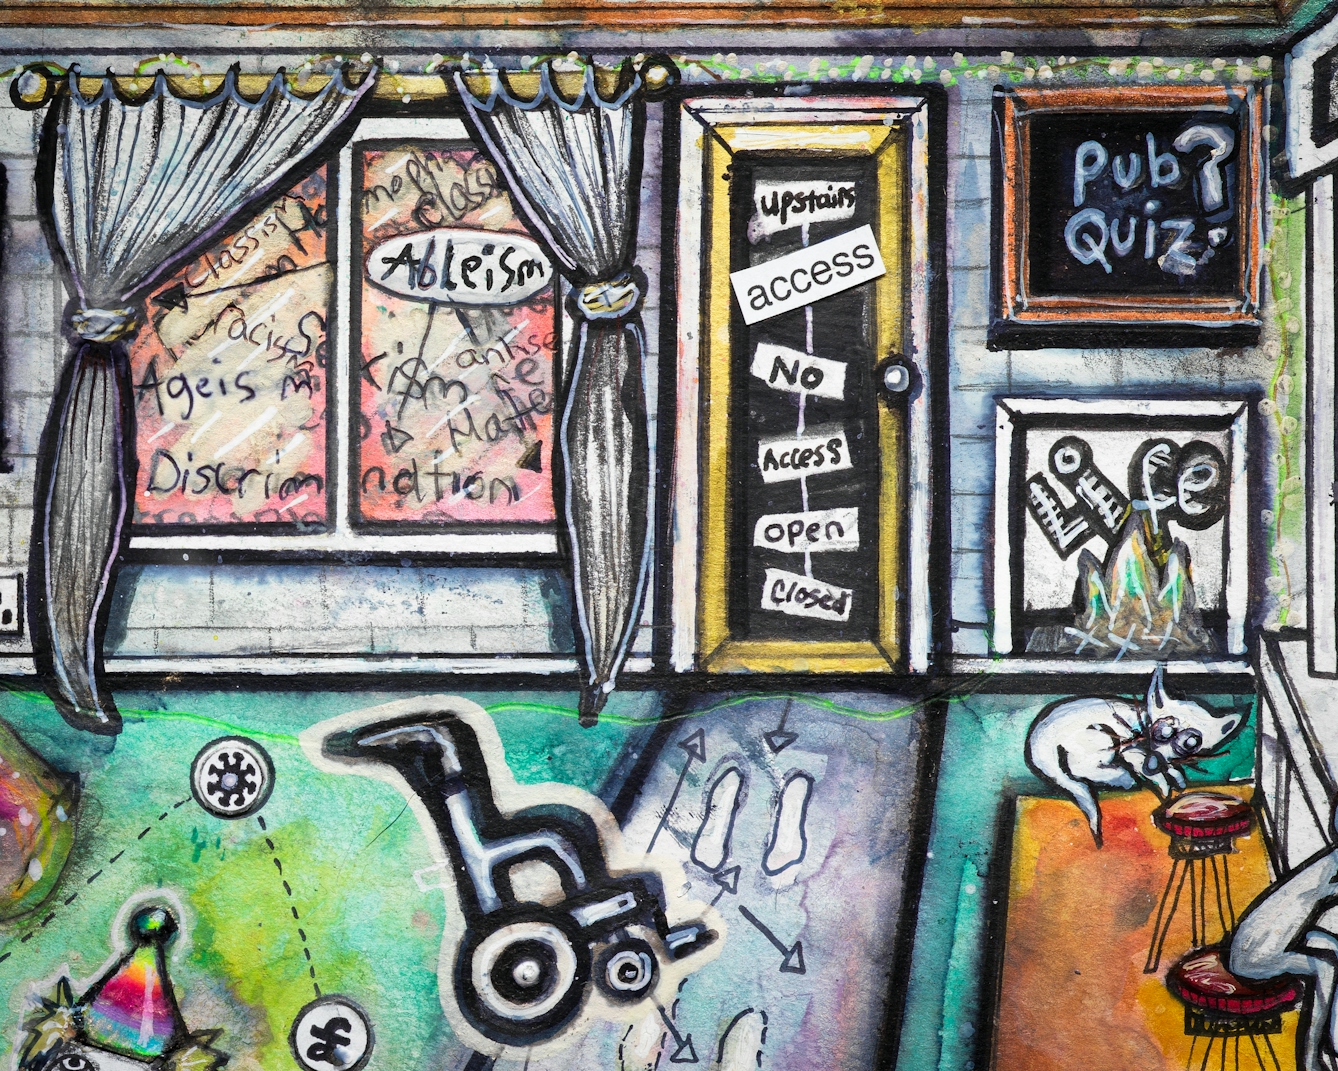 Artwork using watercolour and ink incorporating collaged words throughout the scene. The artwork shows a busy multi-coloured room. On the back wall, a window overlooking the outside world is filled with words including ‘Ableism’.  Next to the window is a door with a few words including the phrase ‘no access’.  Beside the door is a picture of the word ‘life’ burning in flames, and above it a chalkboard with the words ‘Pub Quiz?’ on it.